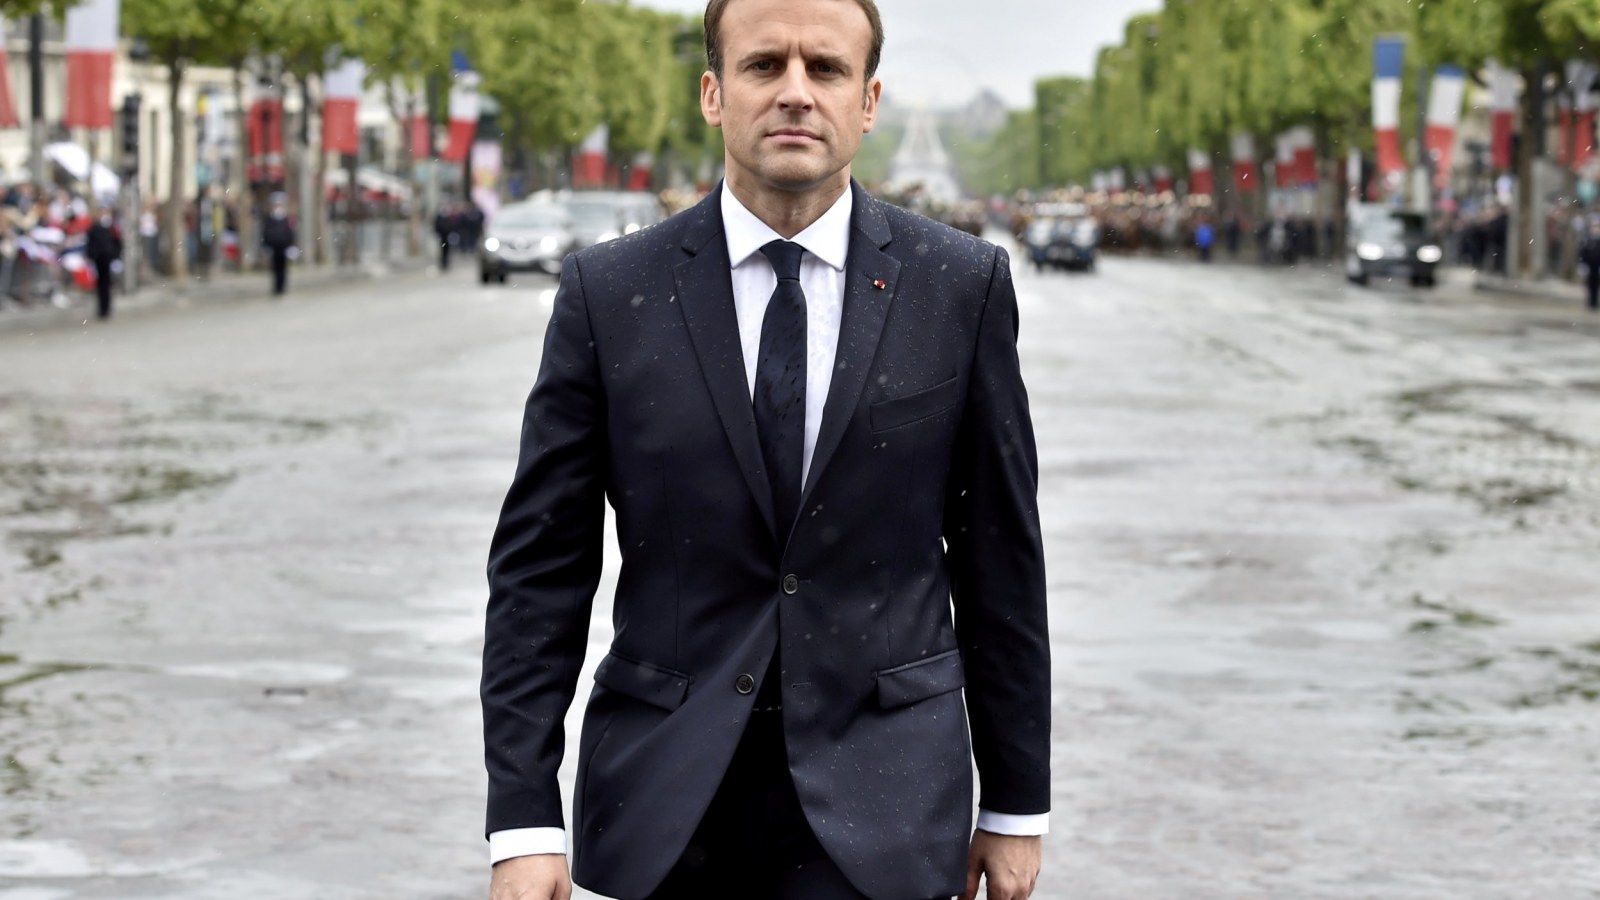 French Resistance: Emmanuel Macron Facing Days of Protests Over Labor Reforms